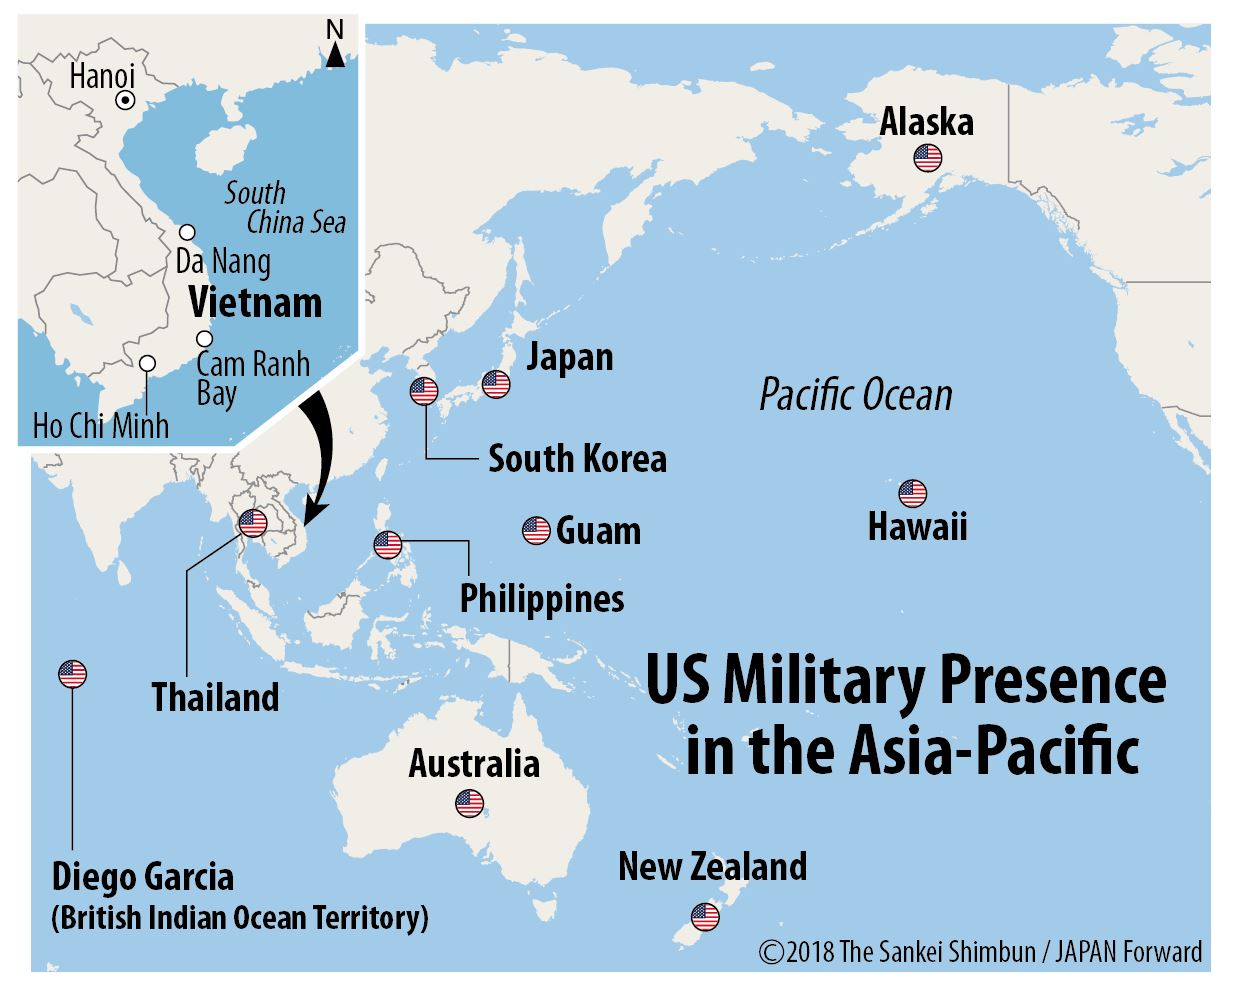 Map of US Military Presence in the Asia-Pacific